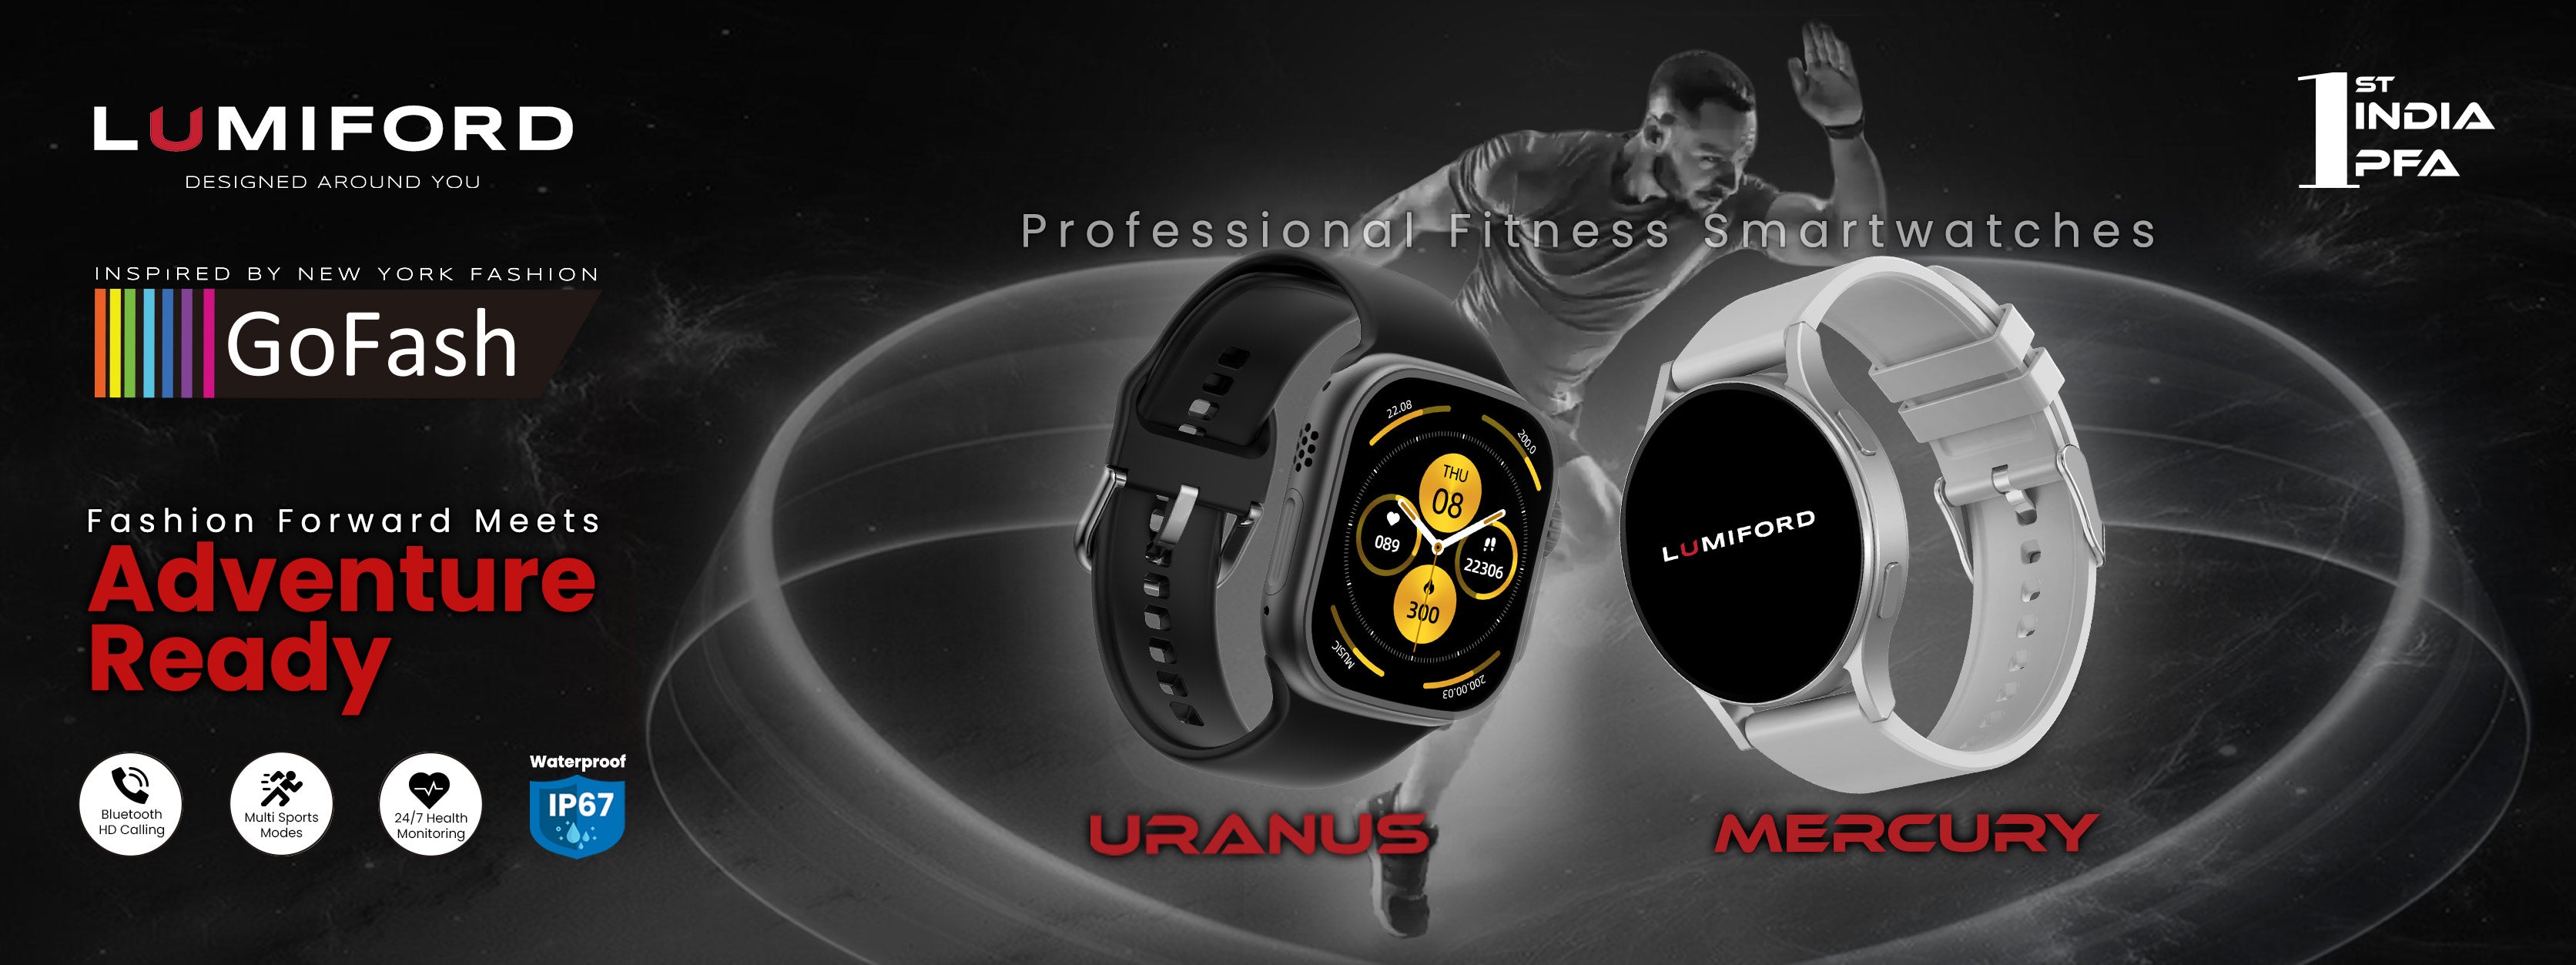 Revolutionizing Fitness Tracking: A Closer Look At Lumiford's Professional Fitness Smartwatches